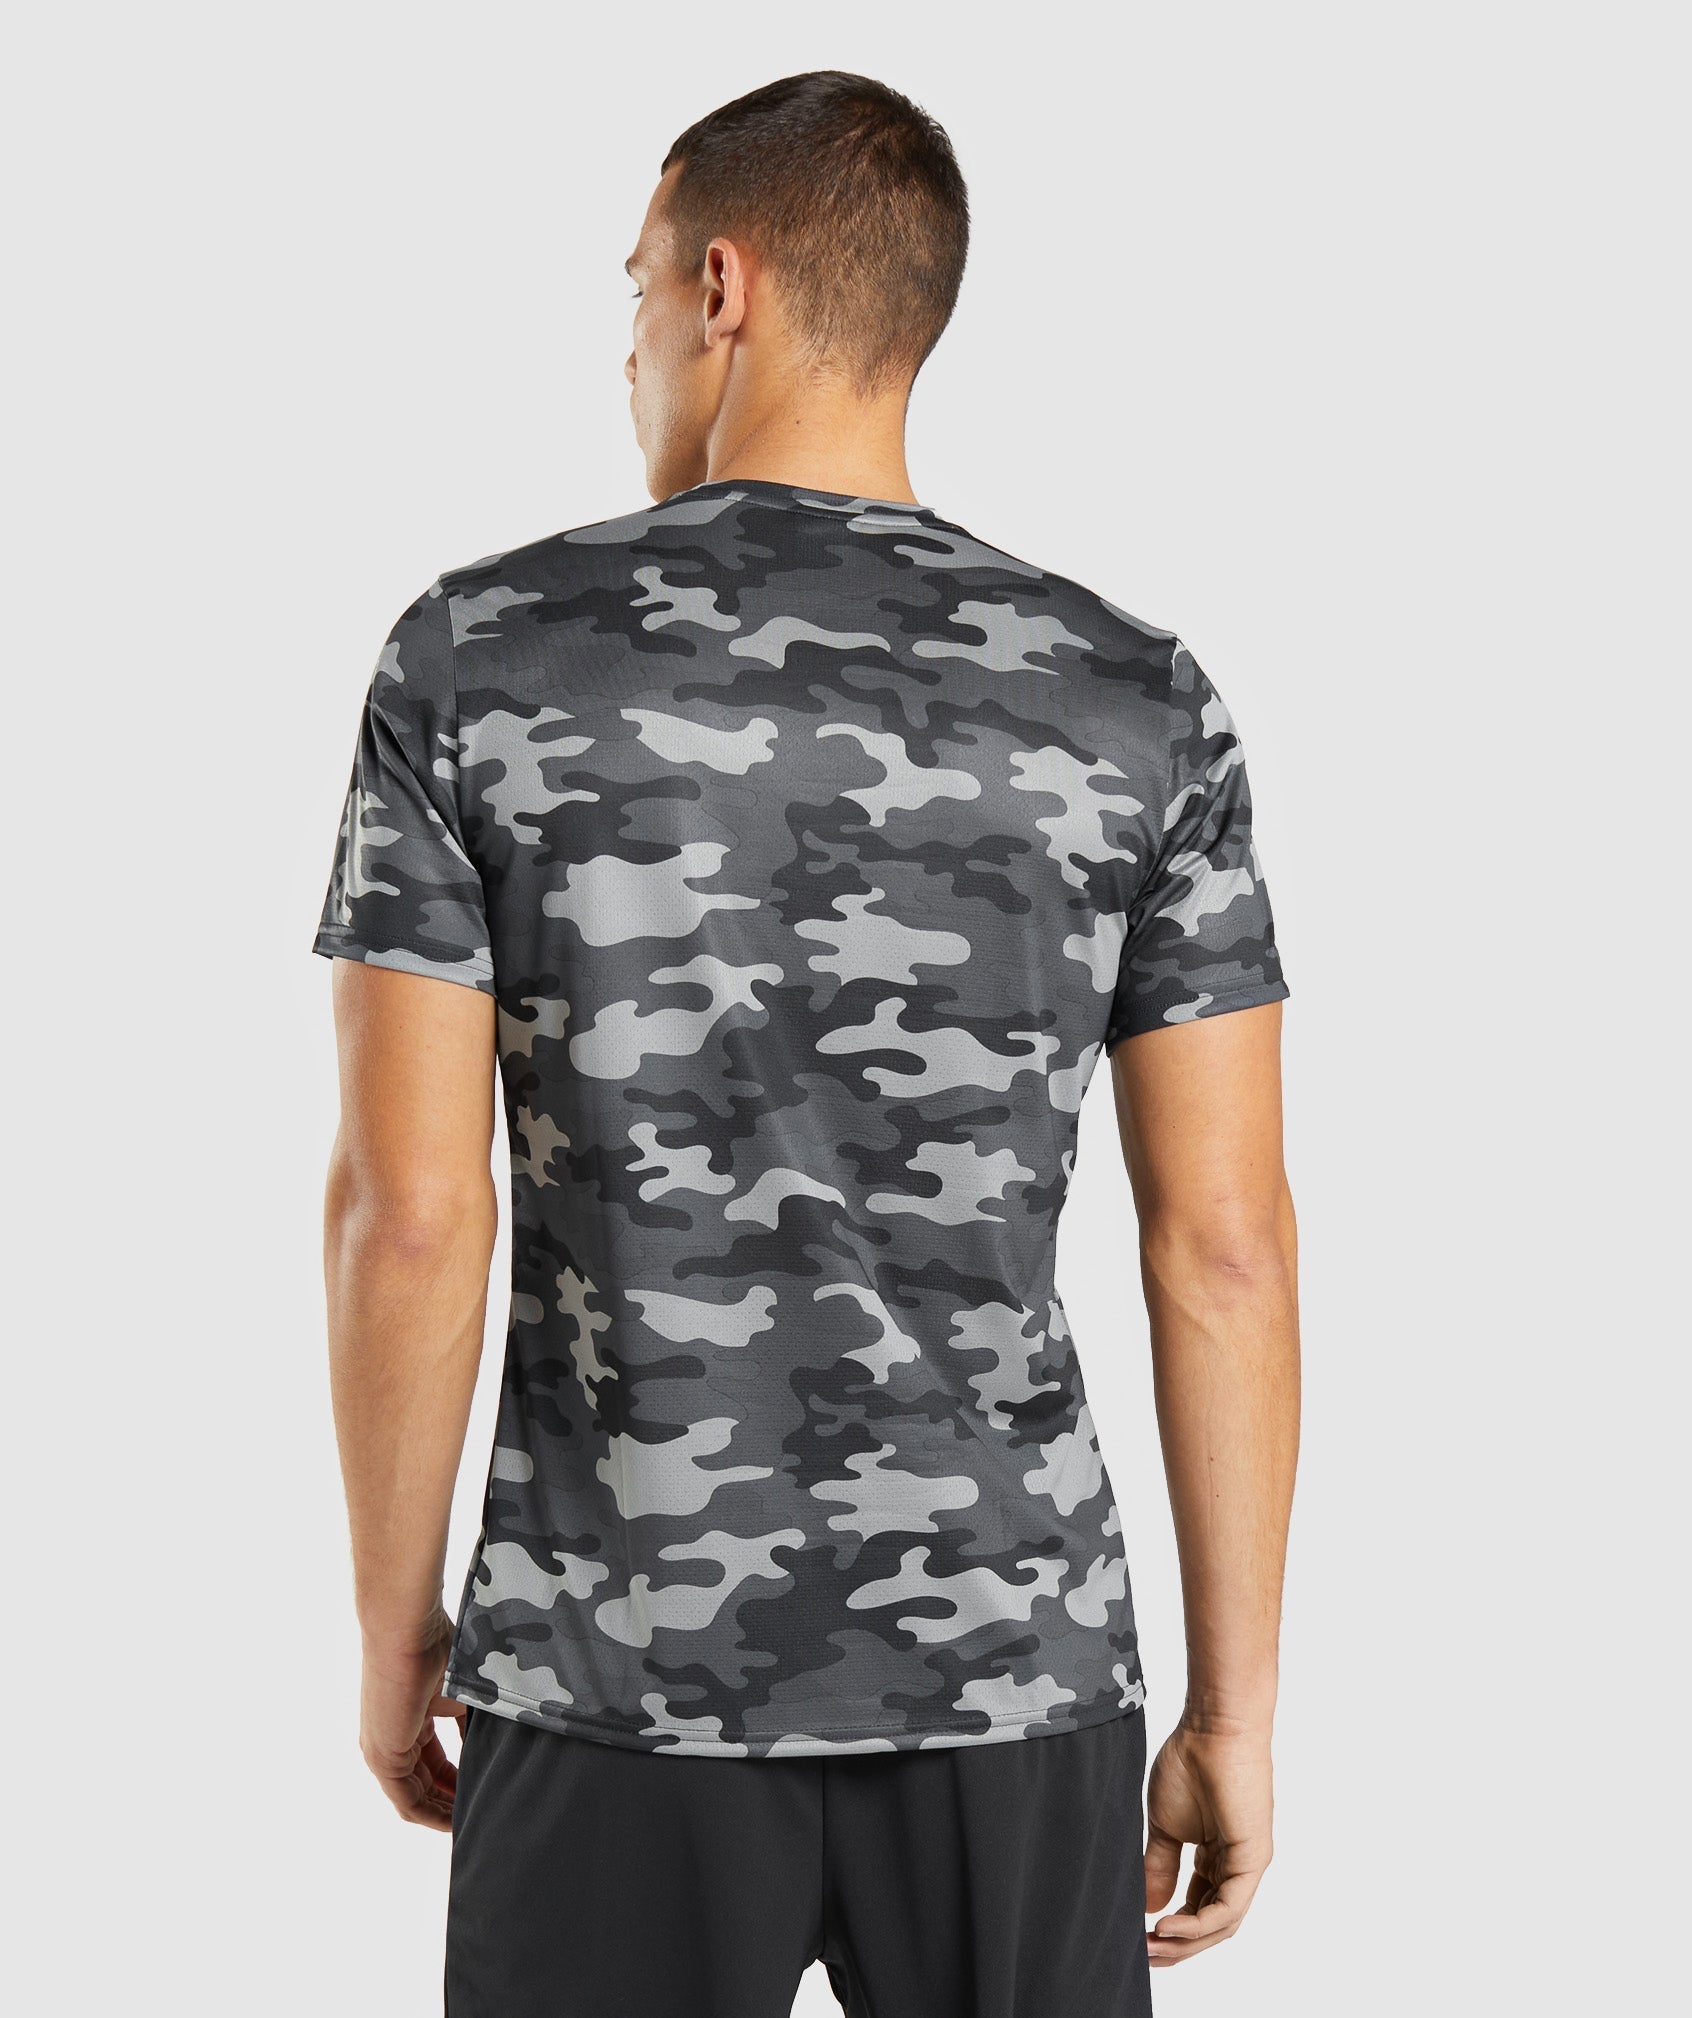 Arrival T-Shirt in Grey Print - view 3